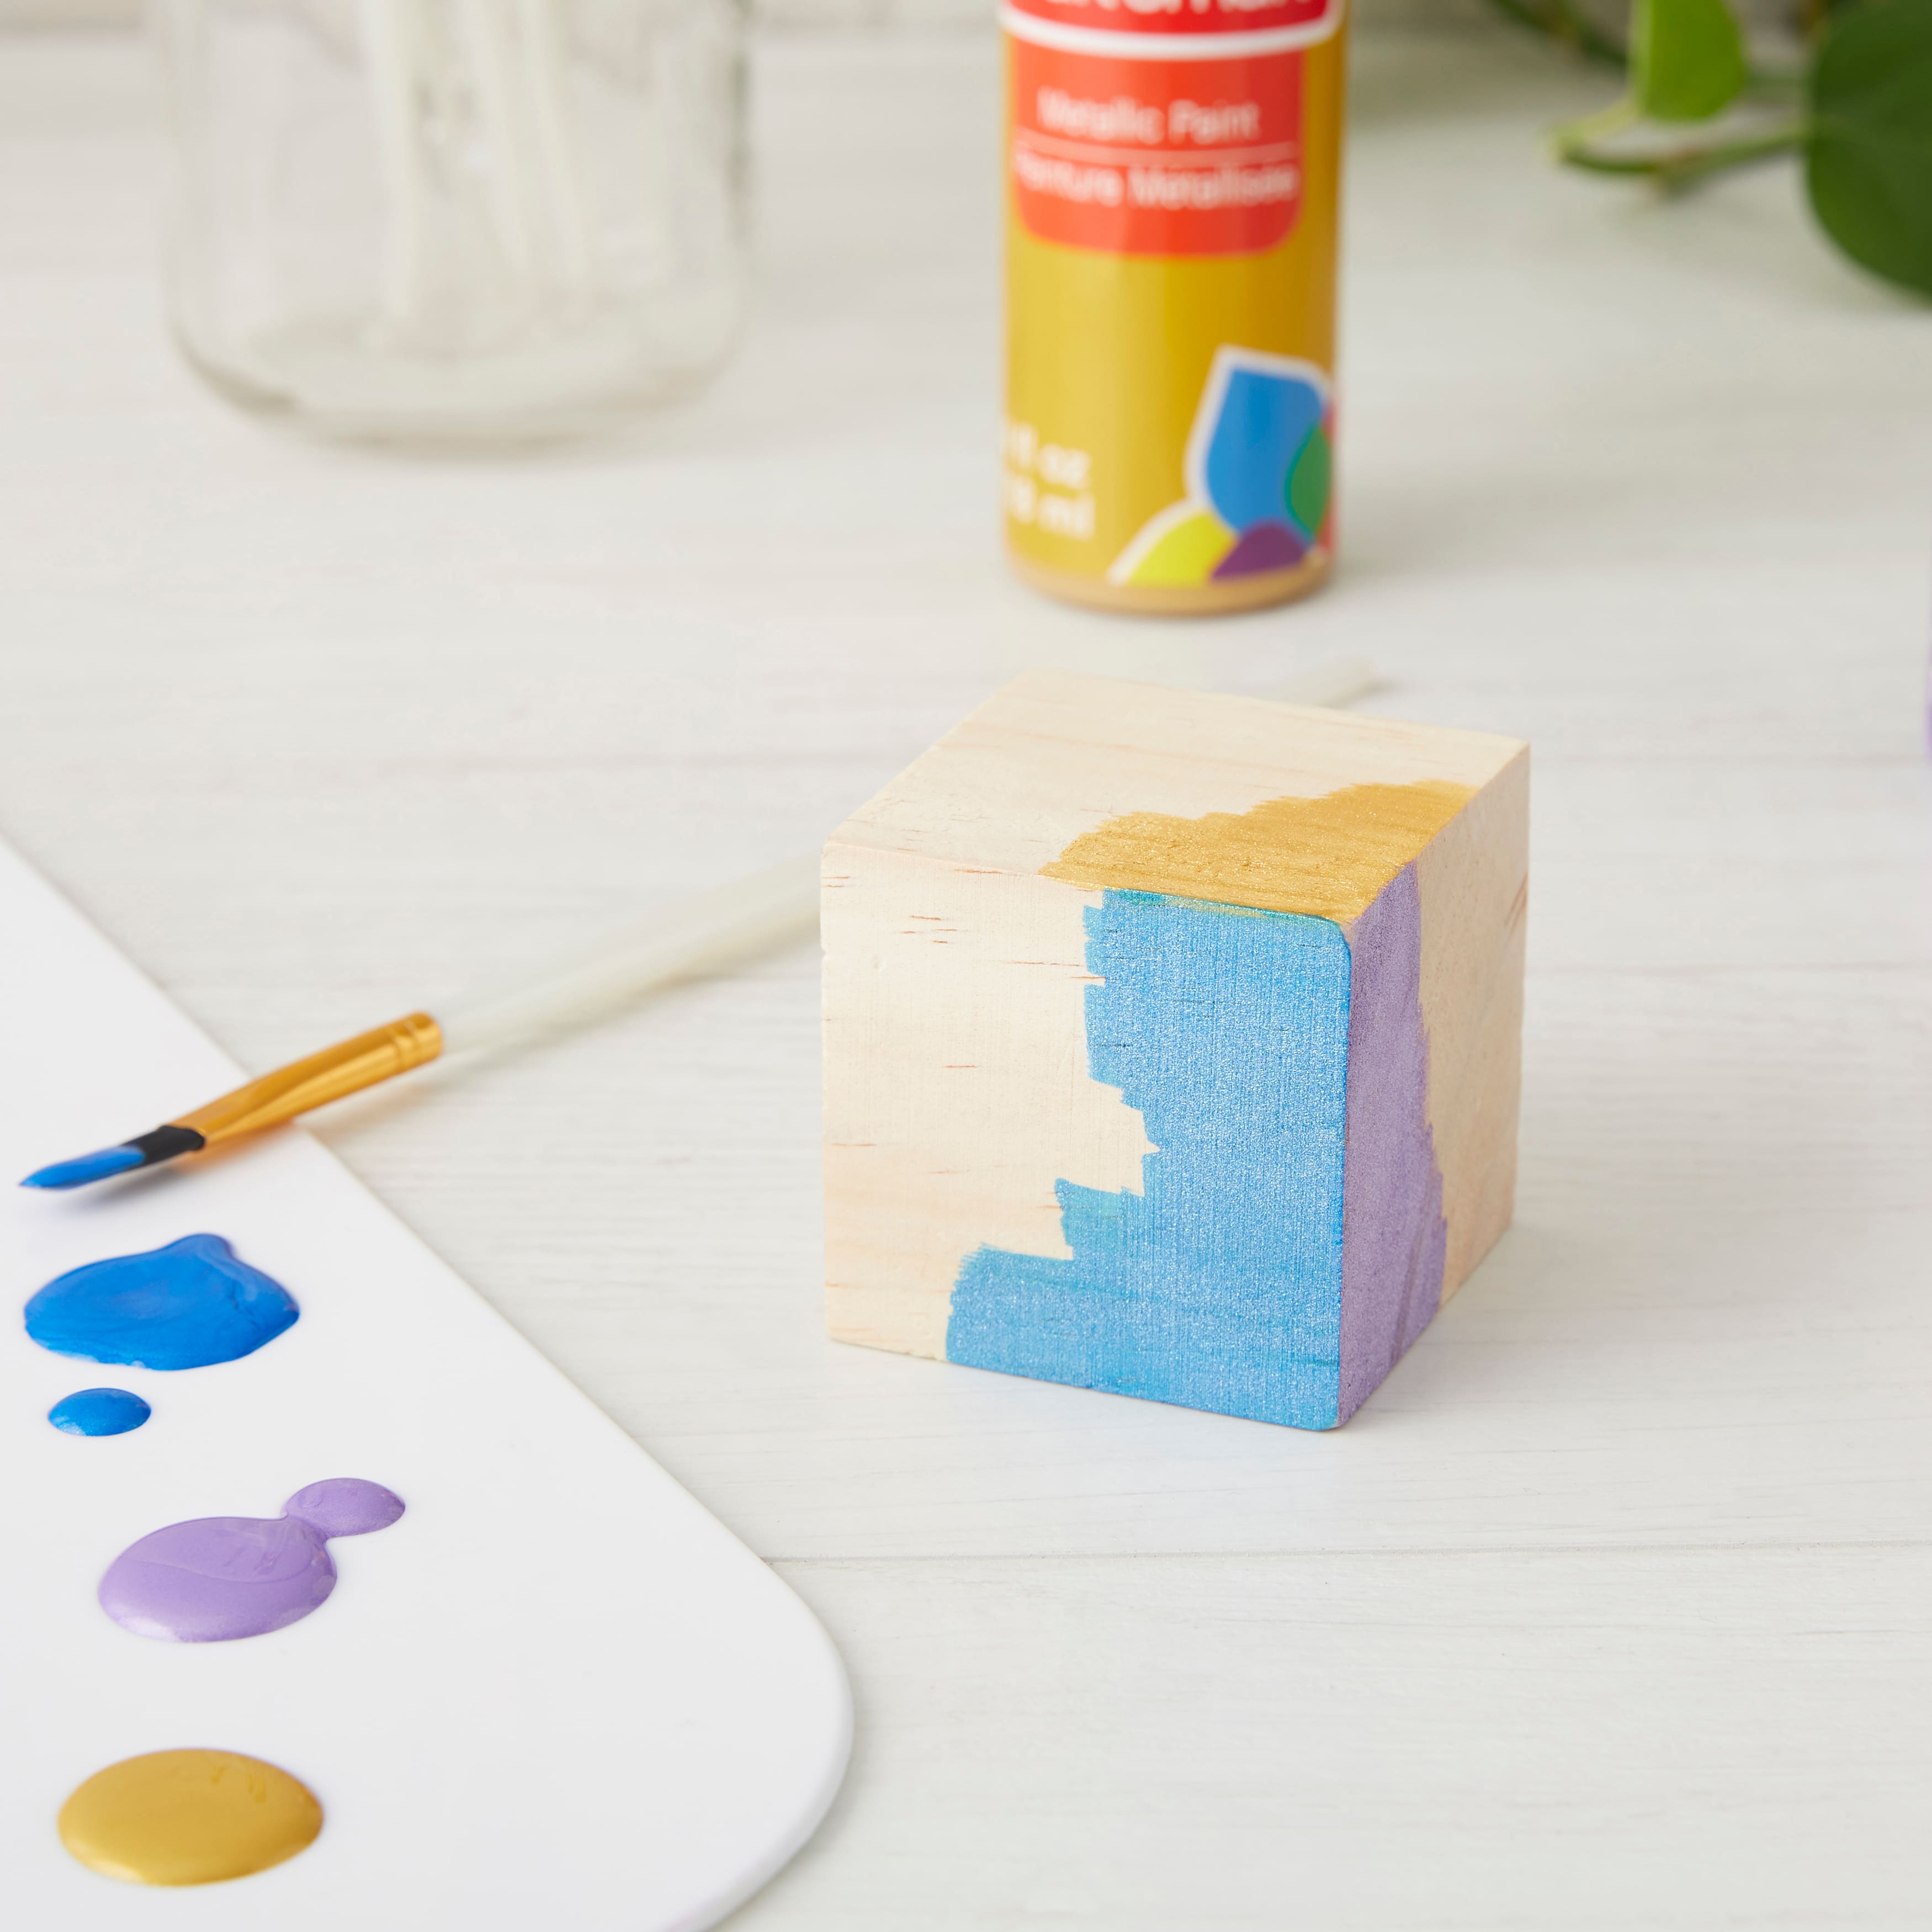 How to Make Painted Wood Blocks & Sculptures for Kids